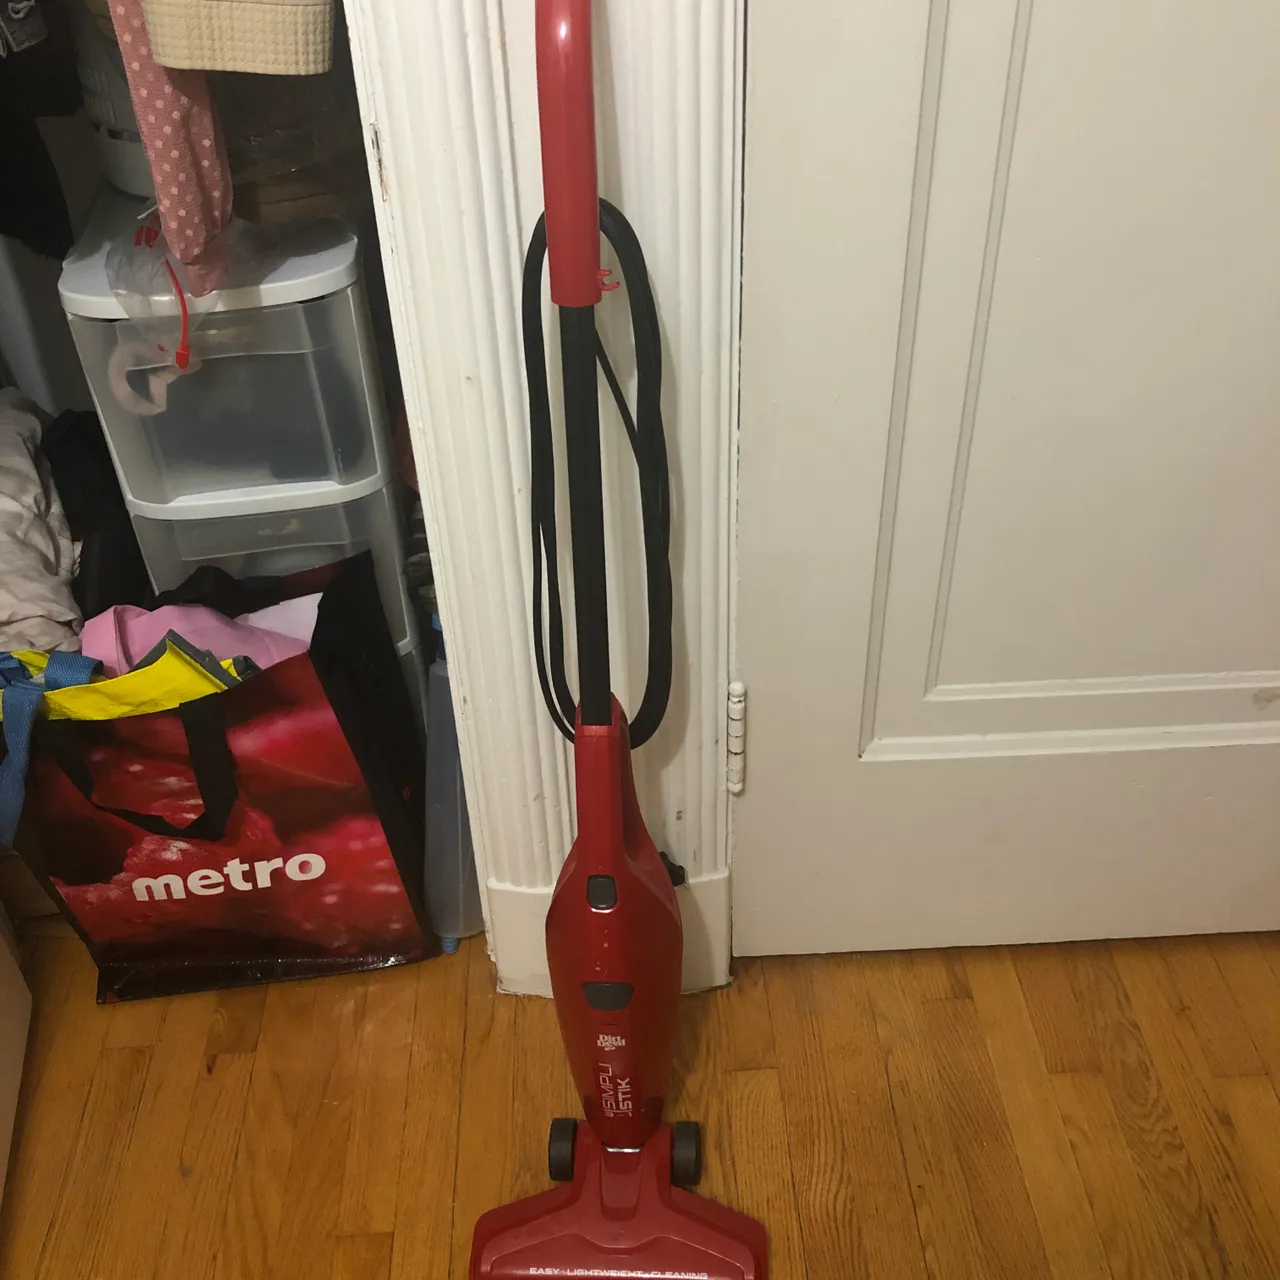 Dirt devil vacuum - works but need filter photo 1